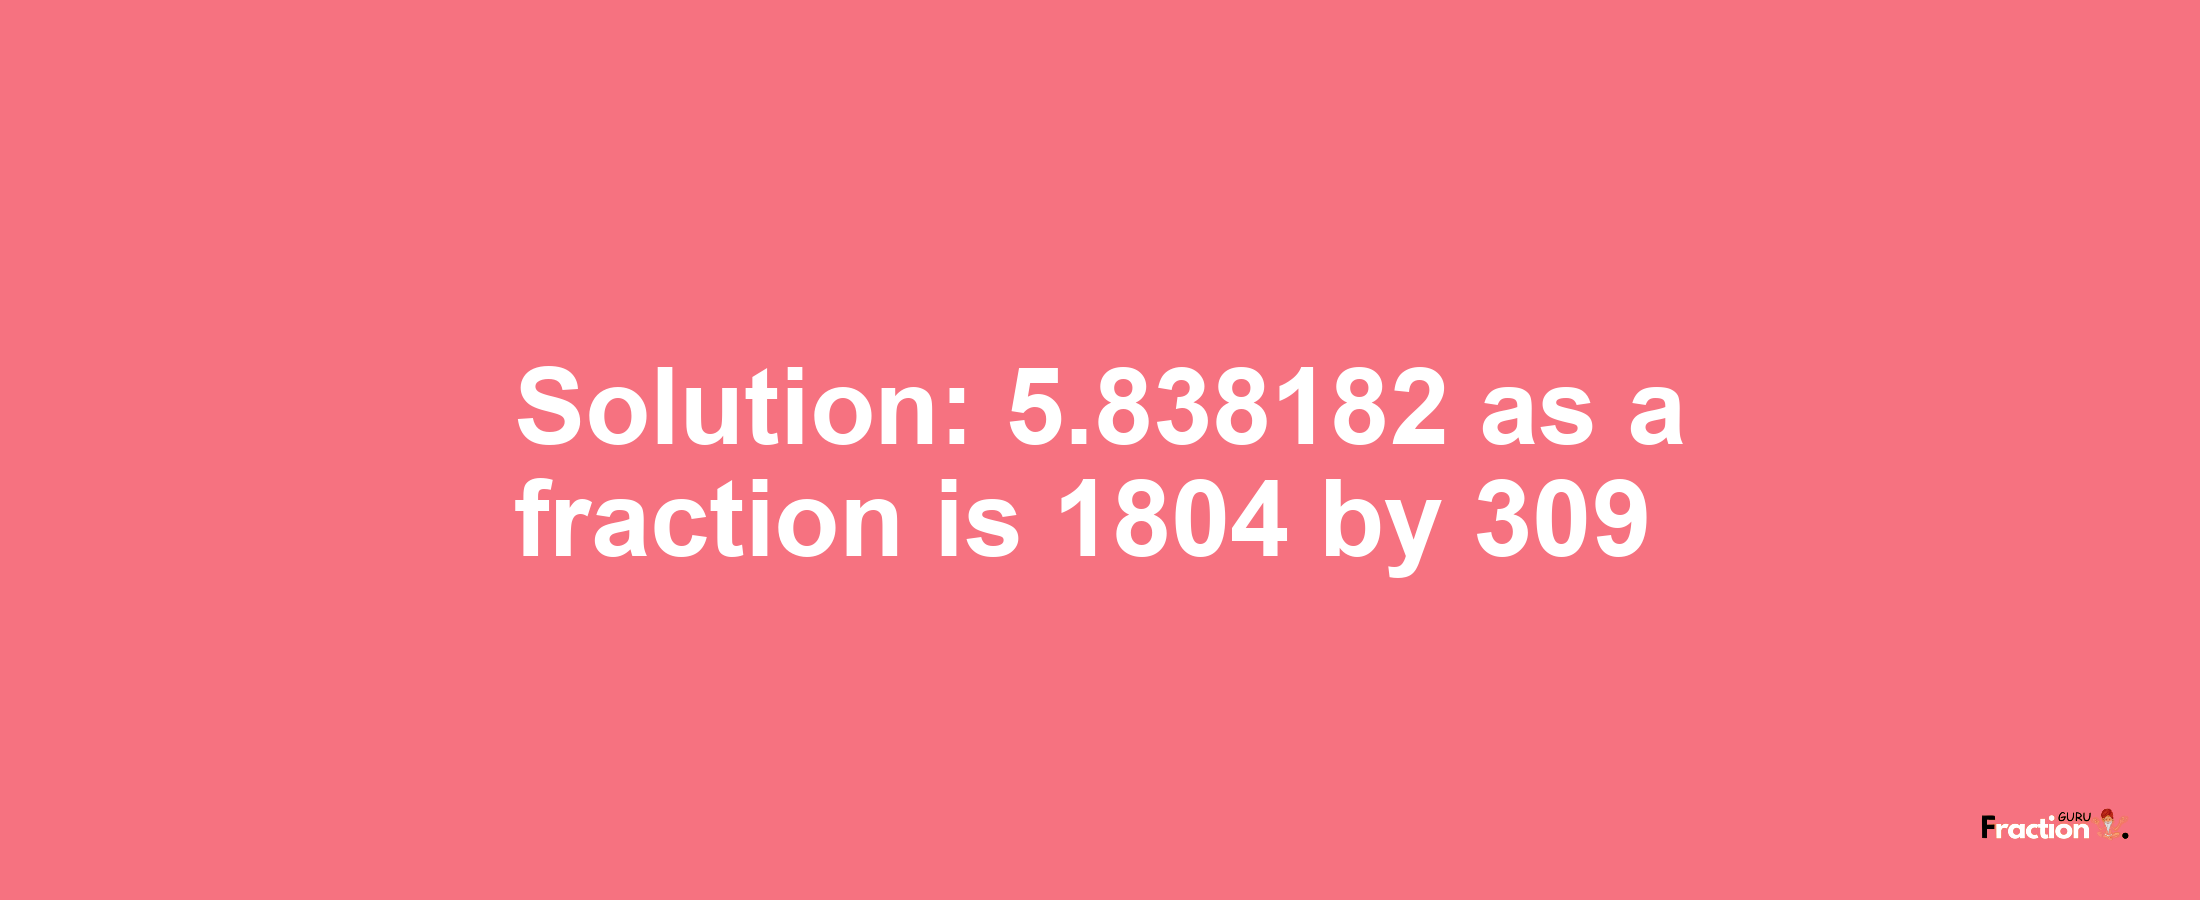 Solution:5.838182 as a fraction is 1804/309